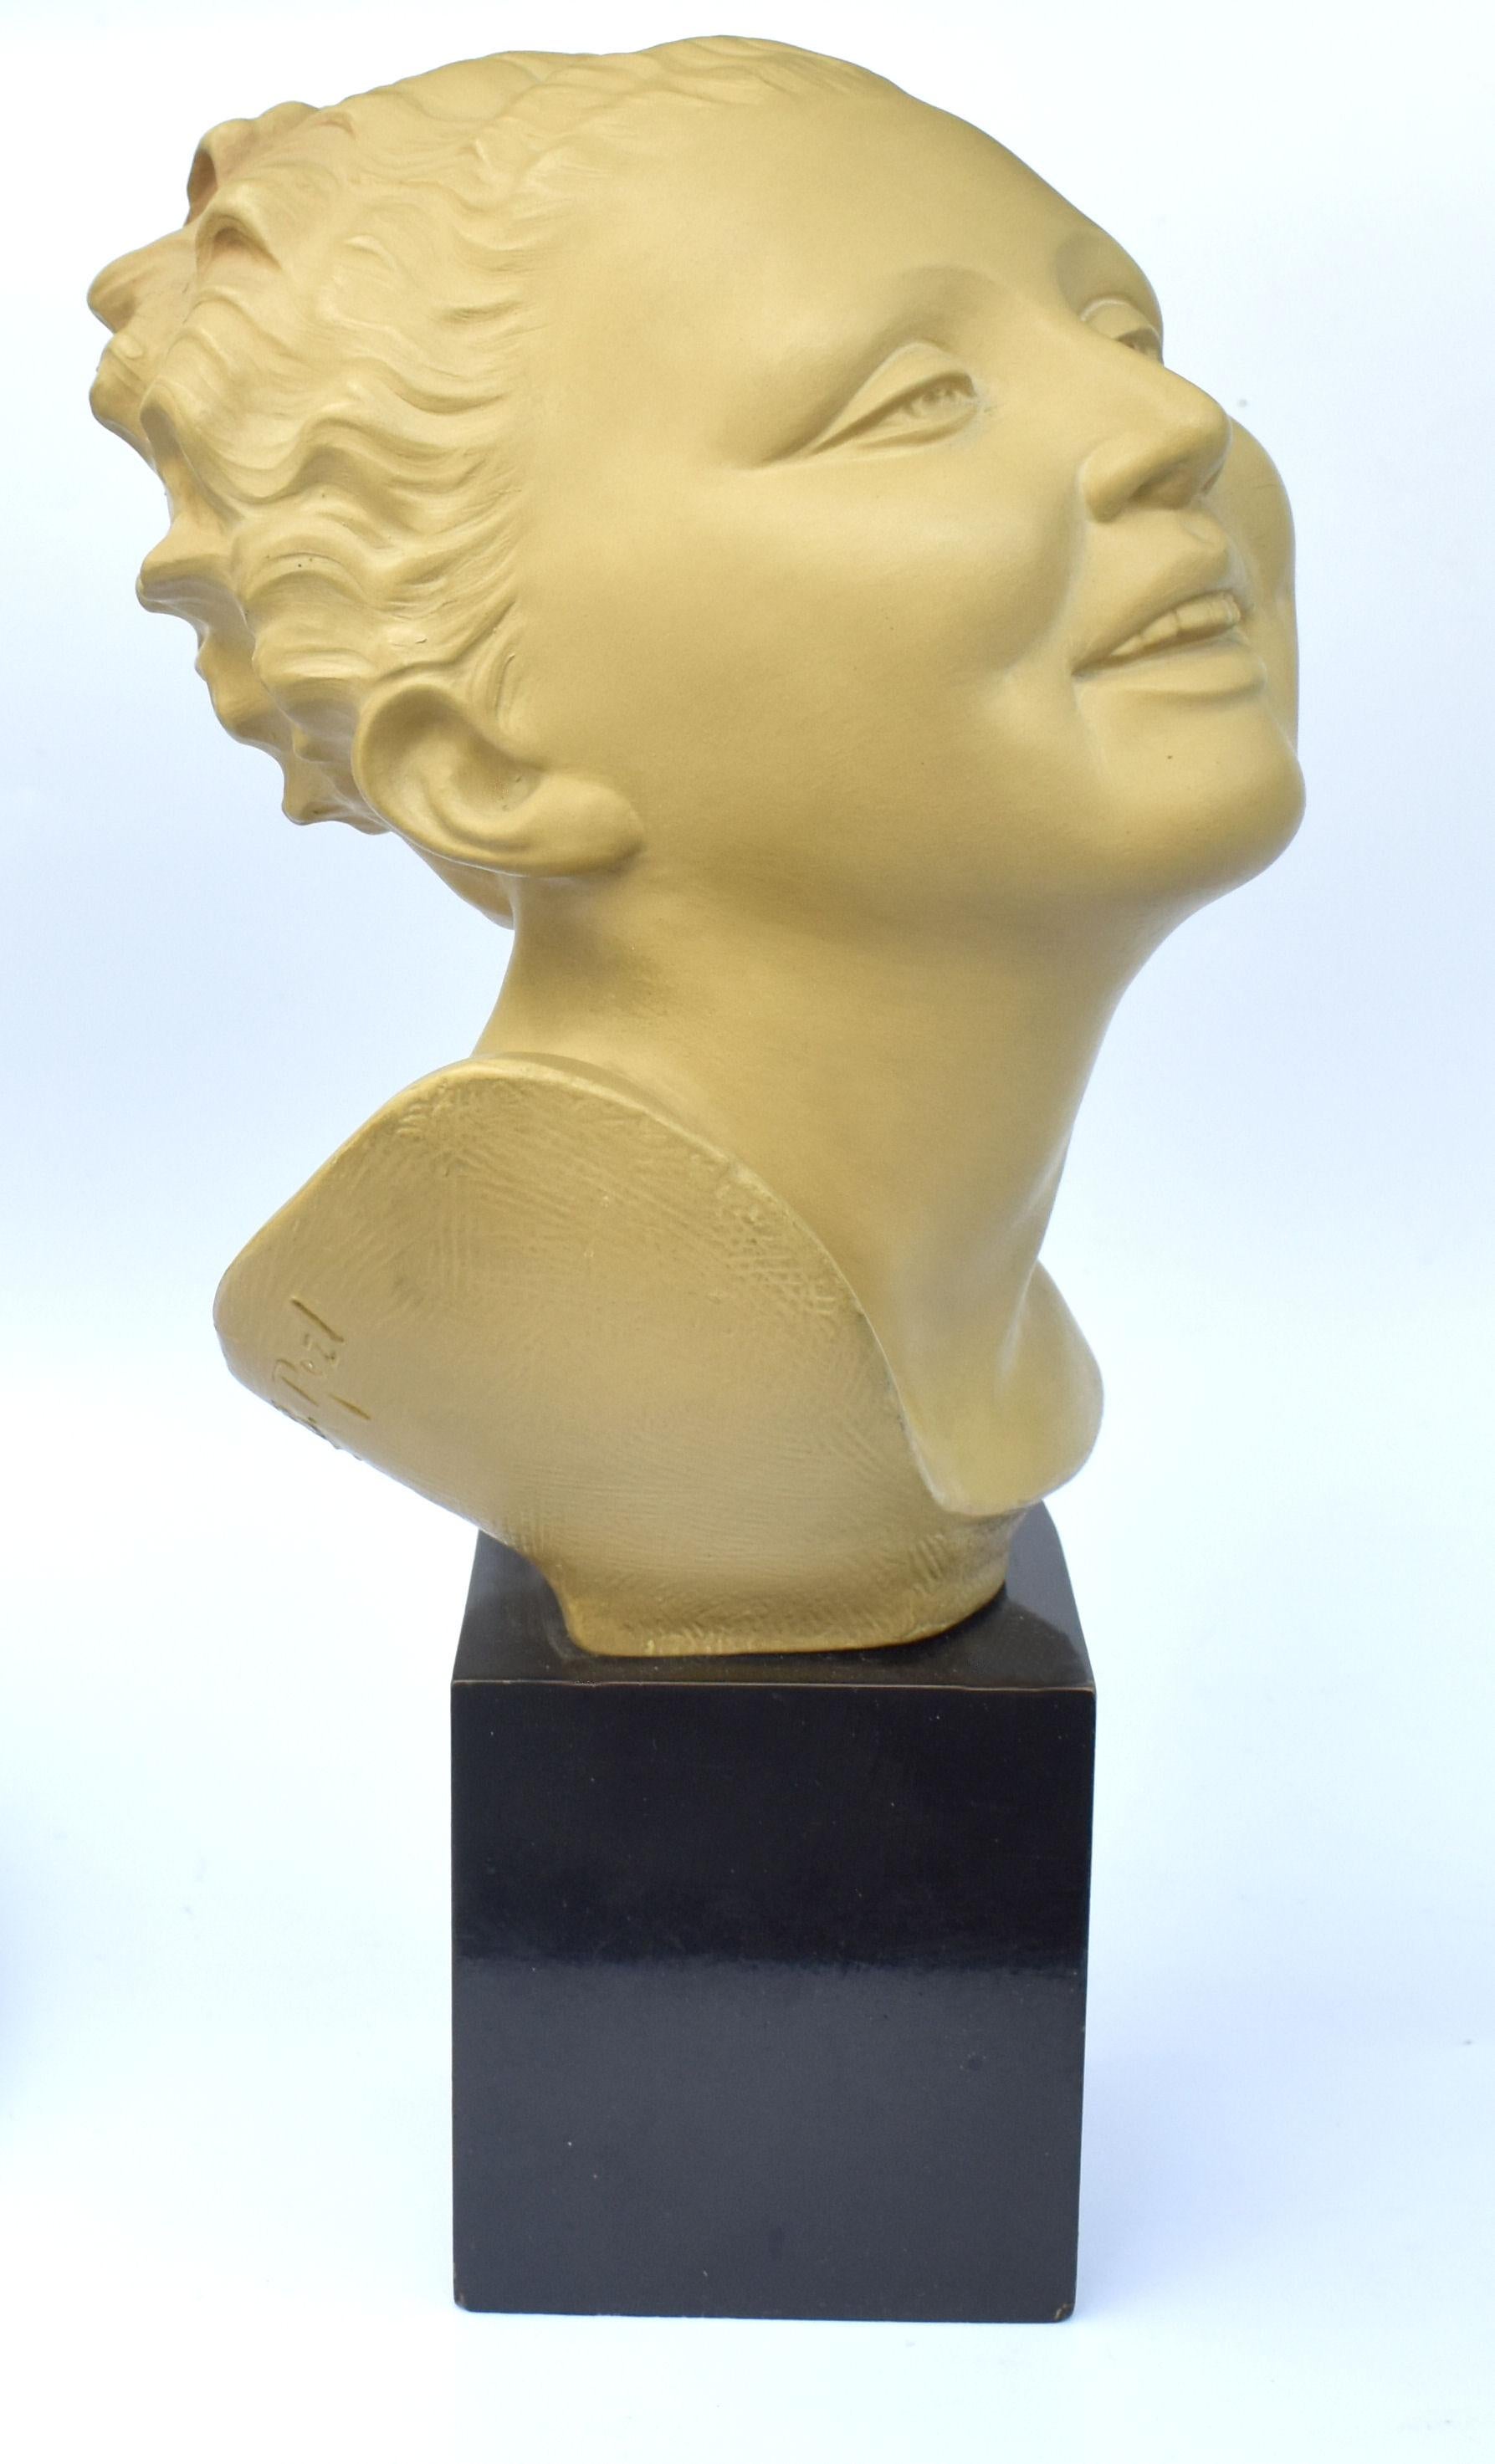 Superbly stylish is this 1930's Art Deco bust of a female, standing 32 cm high and made from terracotta this bust makes the perfect statement piece. Free from any damage and showing only minor signs of age. 
BIO
The sculptor Bohumil Rezl was born